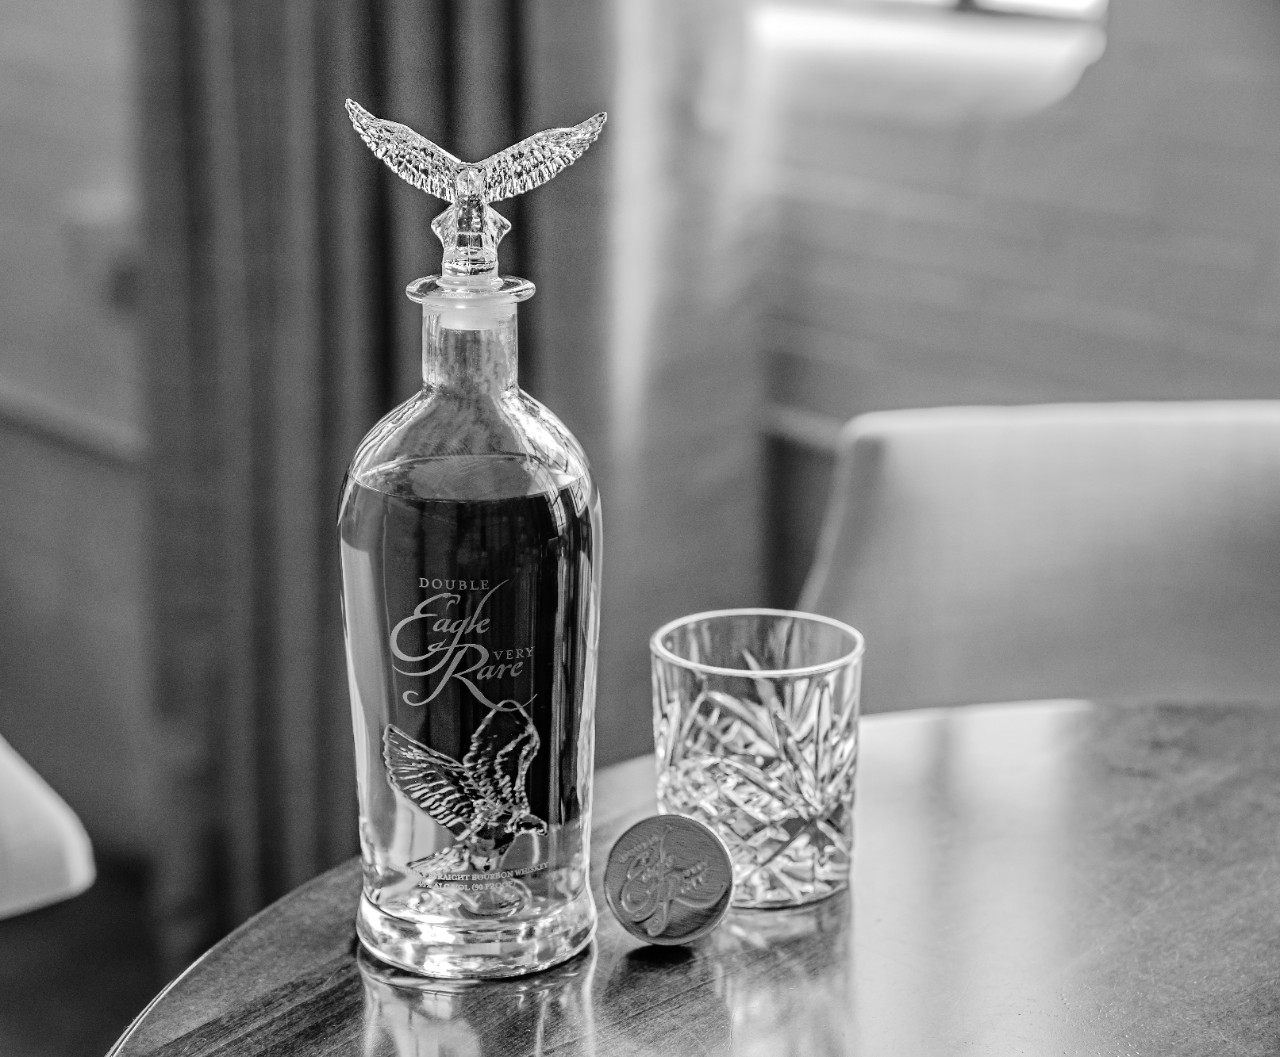 Double Eagle Very Rare Bottle and crystal glass on table in black and white